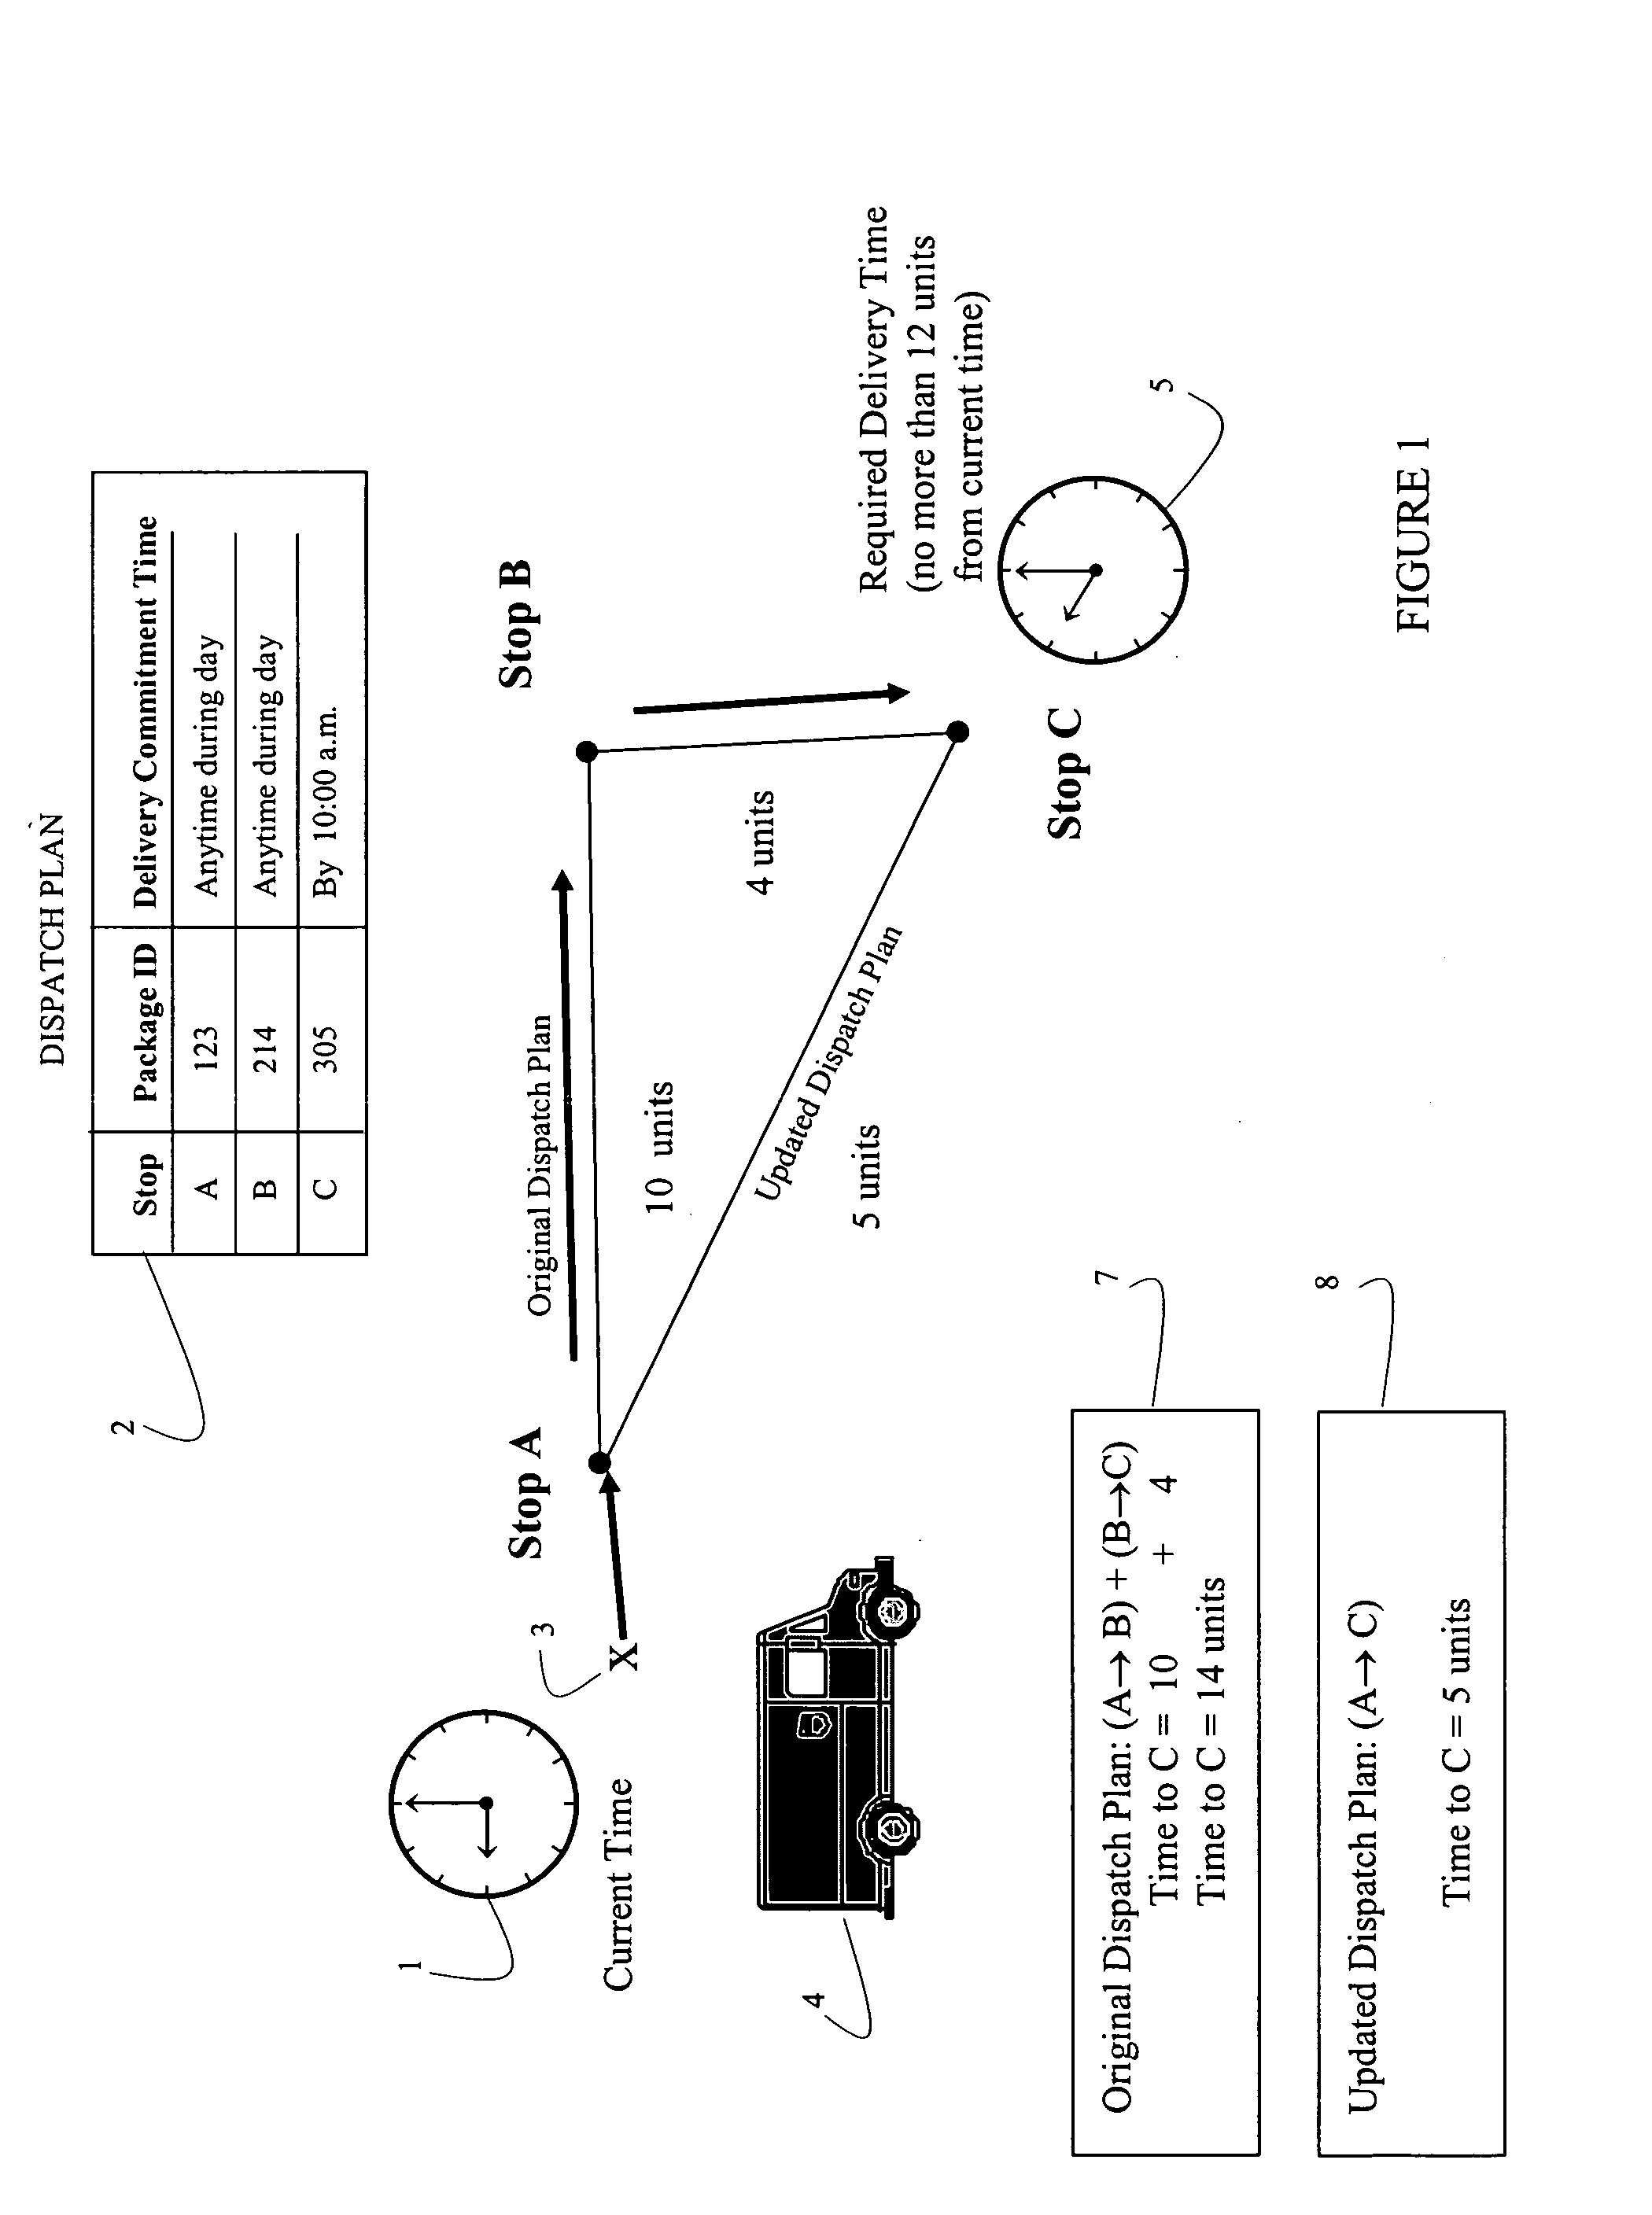 Systems and methods for dynamically updating a dispatch plan